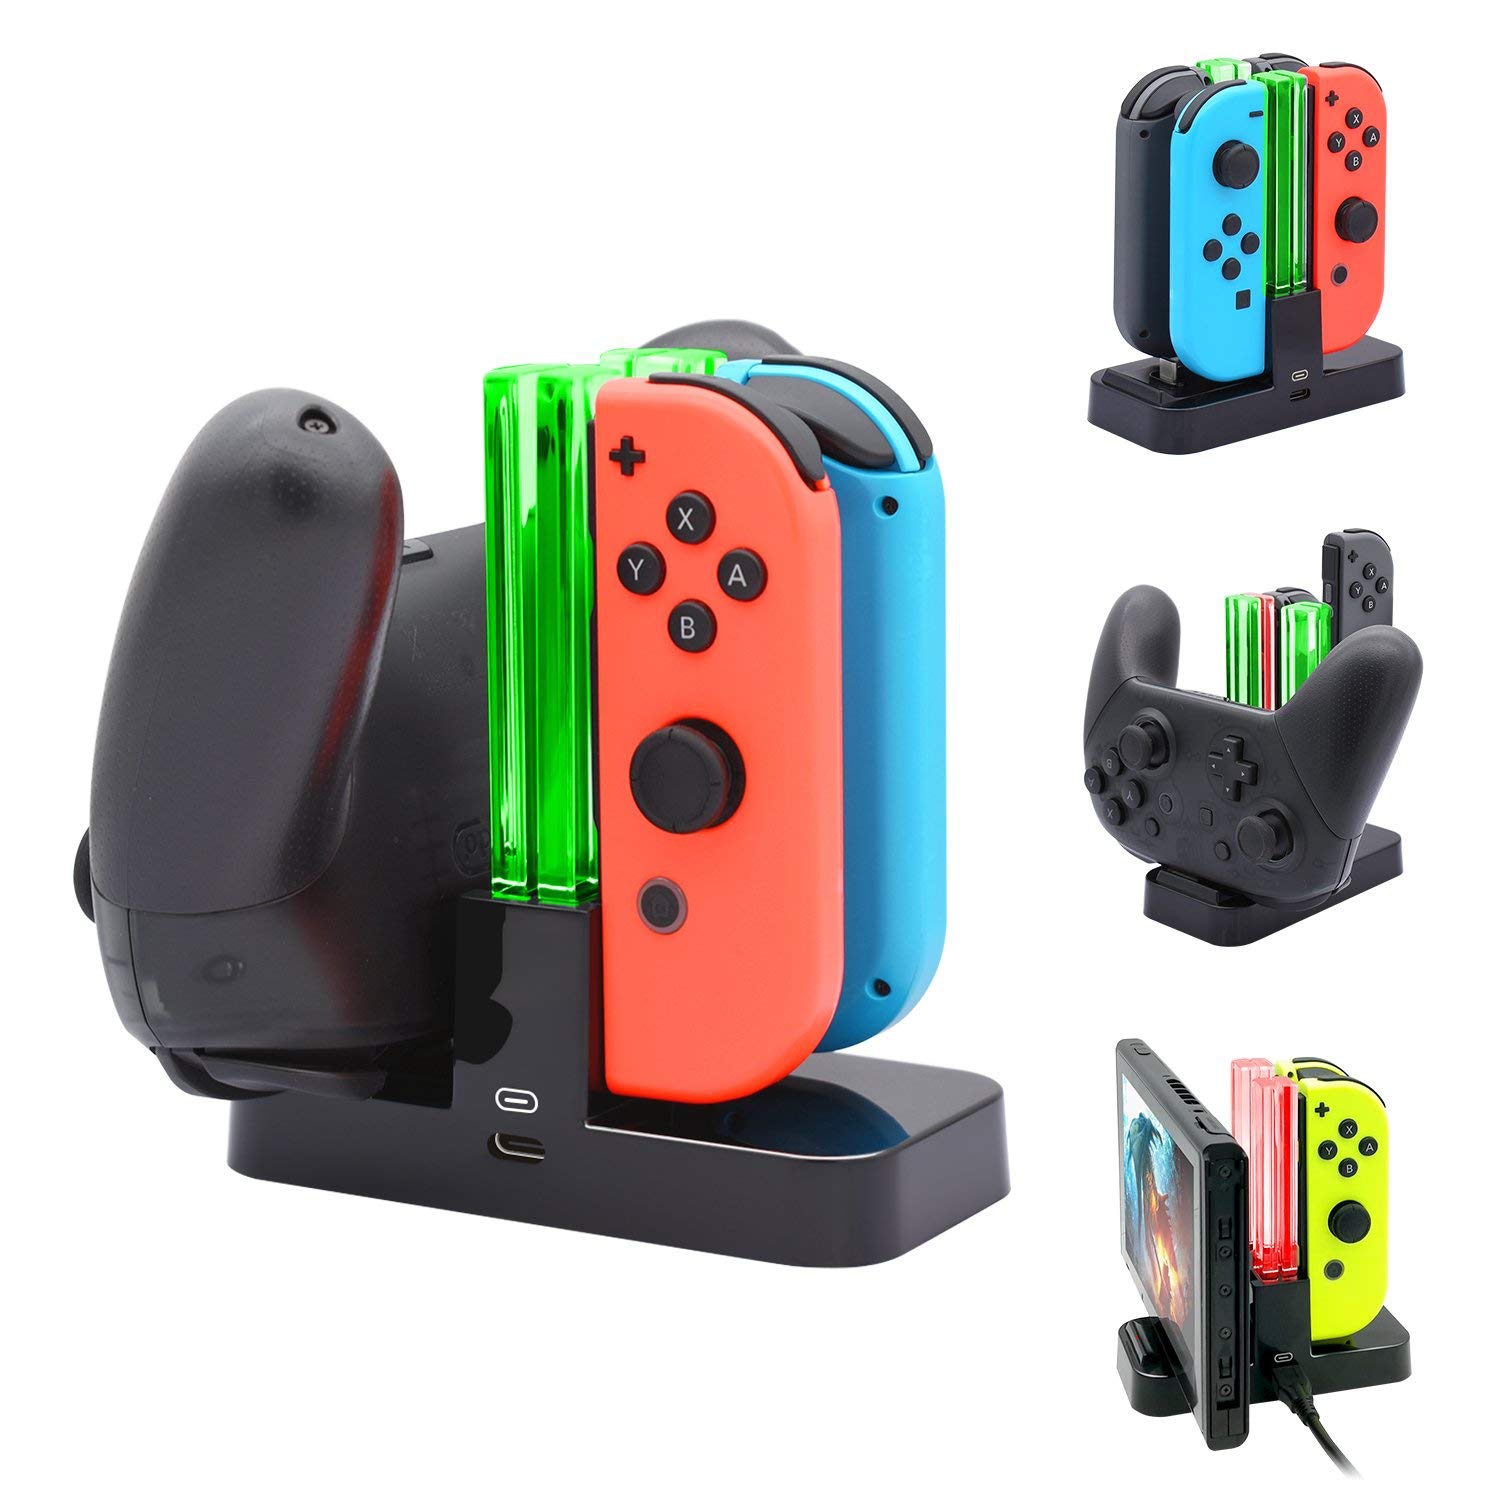 navor Controller Dock Stand - Joy-Con Charger Dock For Nintendo Switch Gaming Controllers - Charging Dock for Joy-con and Pro Controller with Type C Cable - Docking Joycon Station